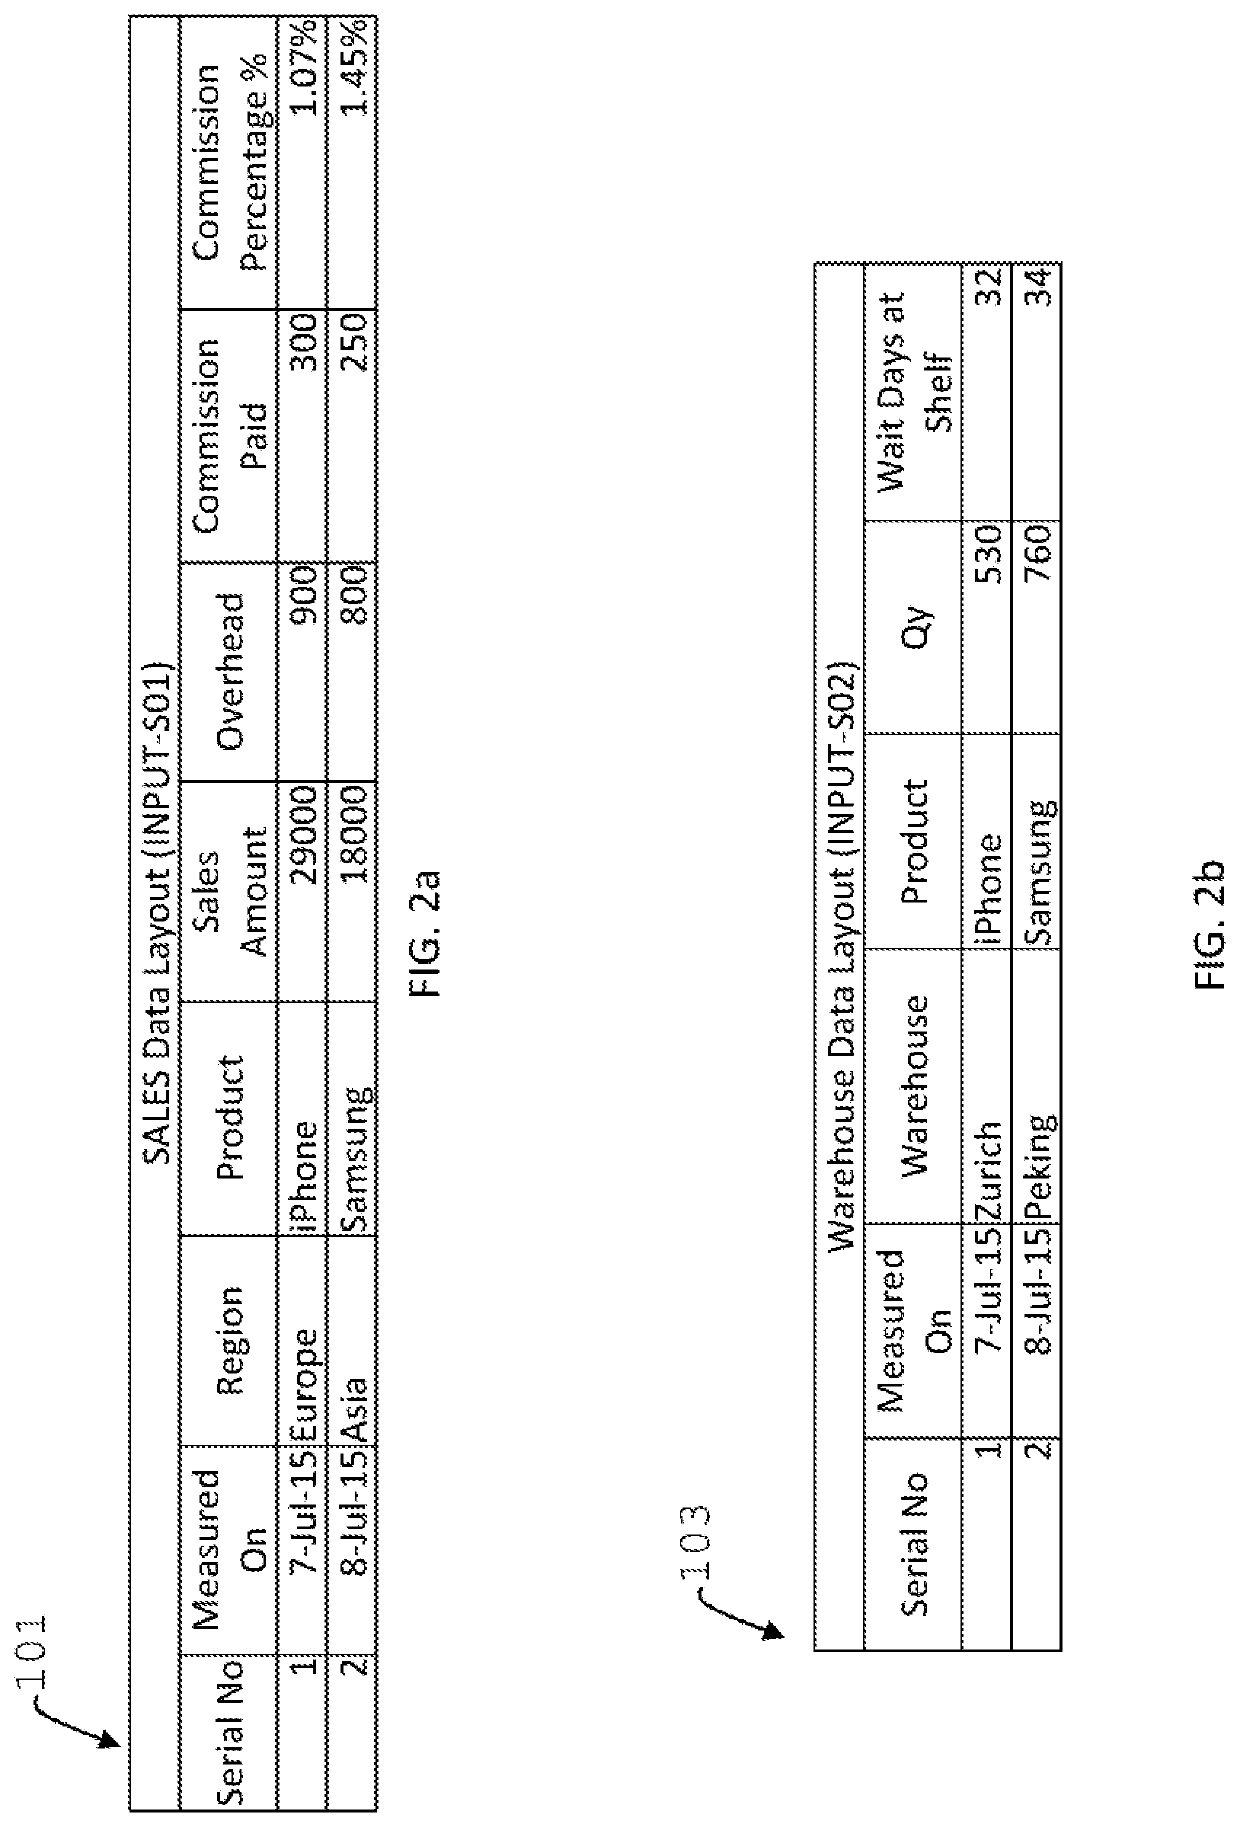 System and methods for user-configurable virtual appliance for advanced analytics using streaming/IoT/big data